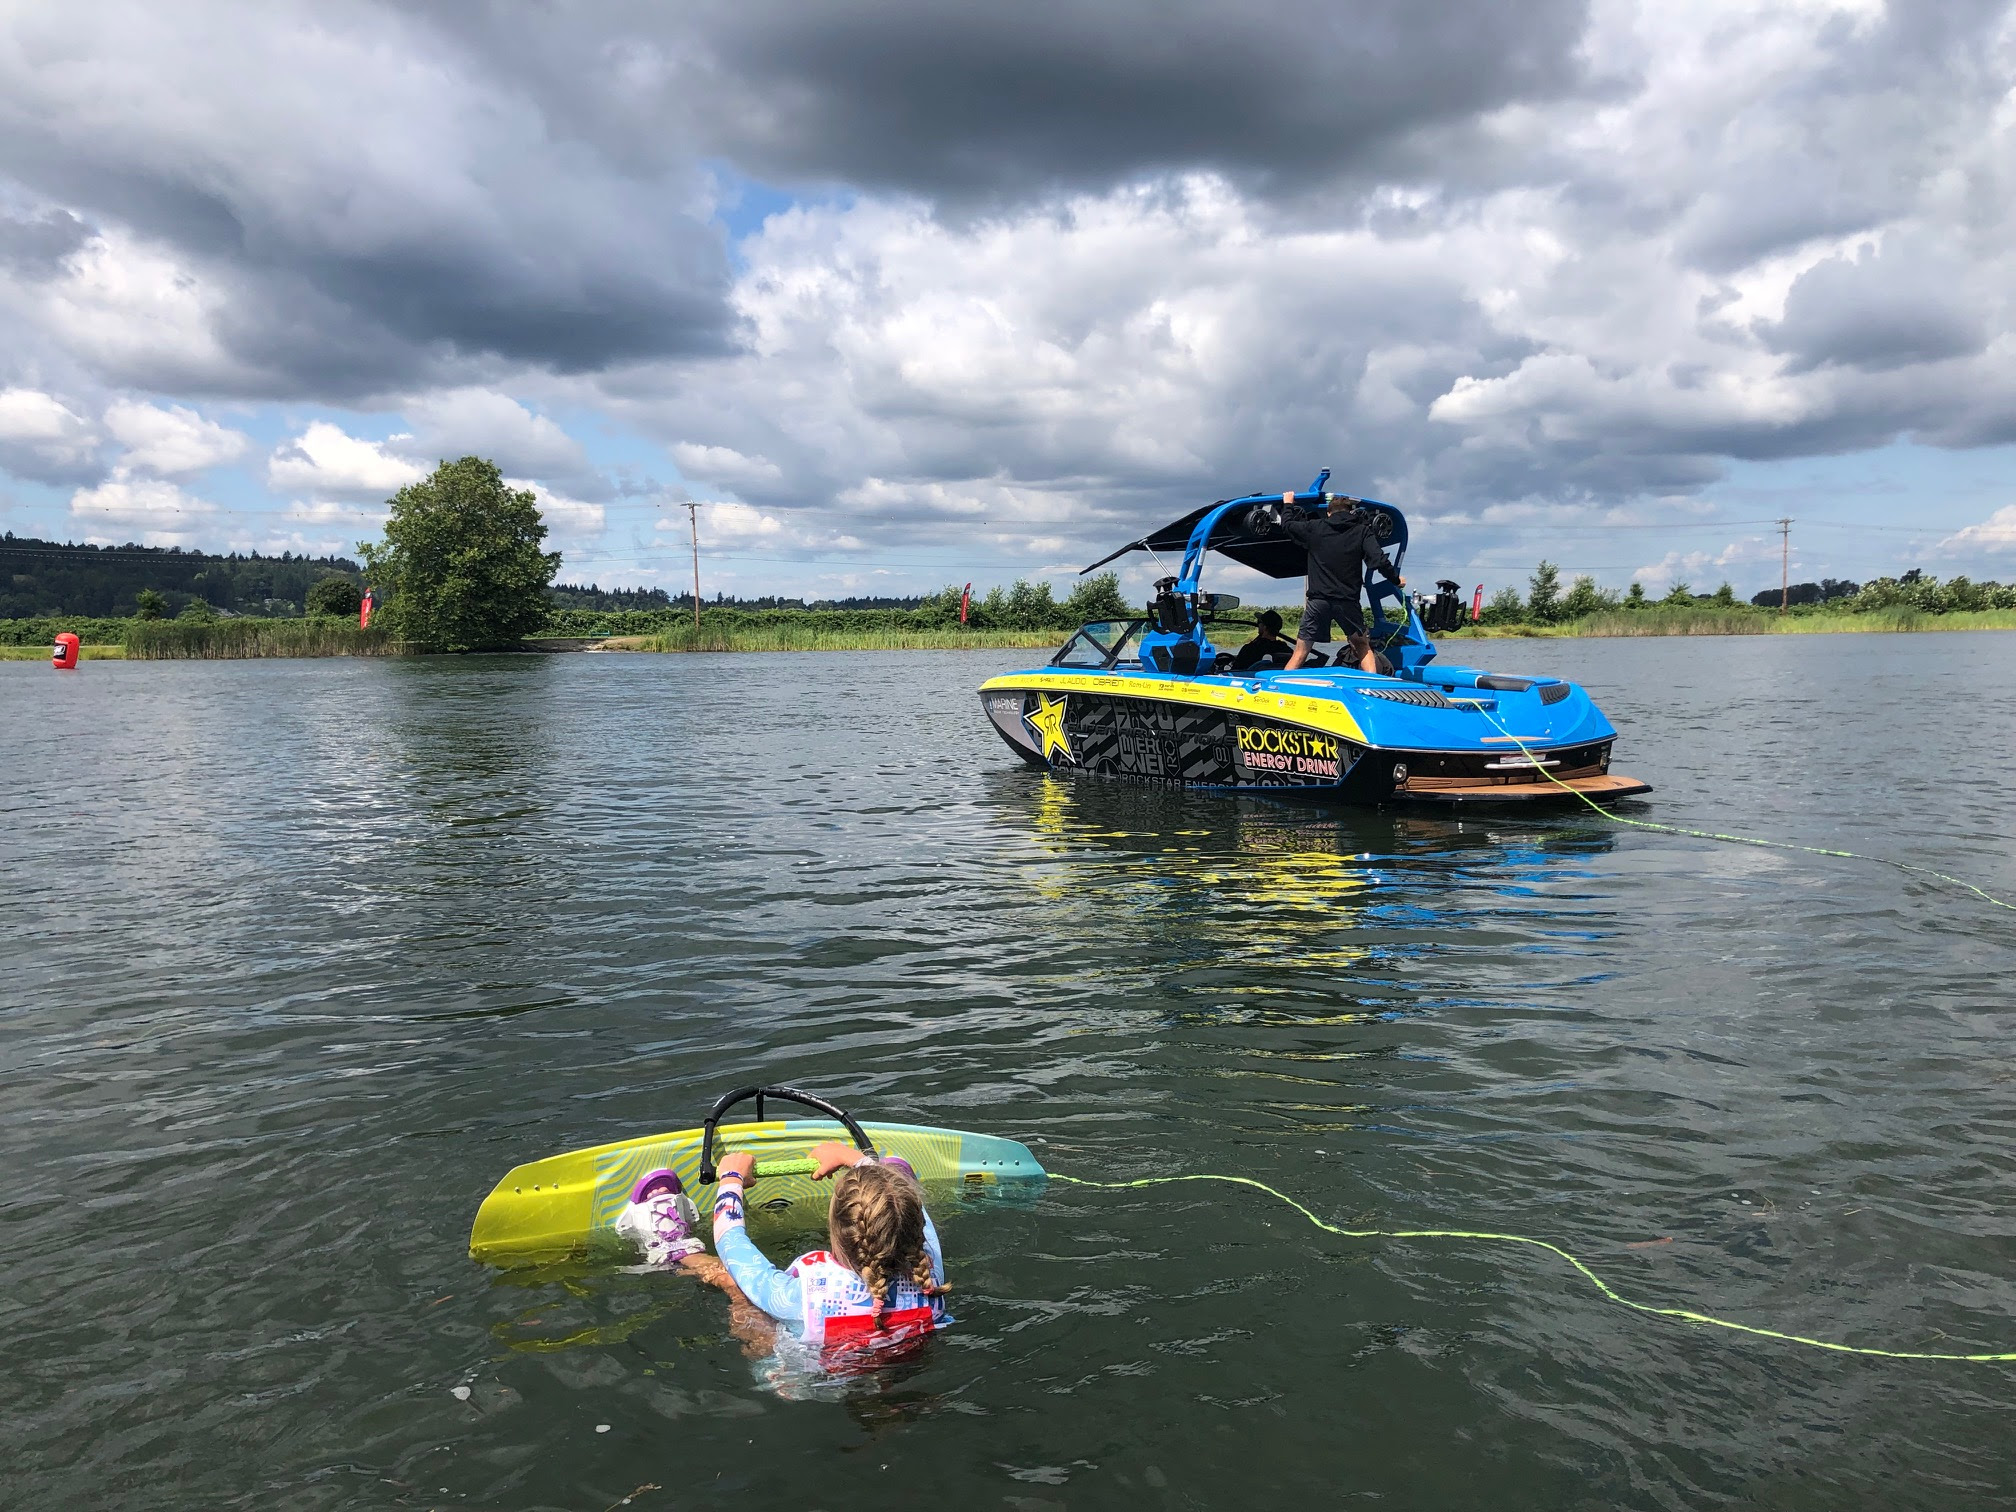 NATIONS TOP AMATEURS THROW DOWN ON DAY ONE OF THE 2019 NAUTIQUE WWA WAKEBOARD NATIONAL CHAMPIONSHIPS PRESENTED BY ROCKSTAR ENERGY! ????